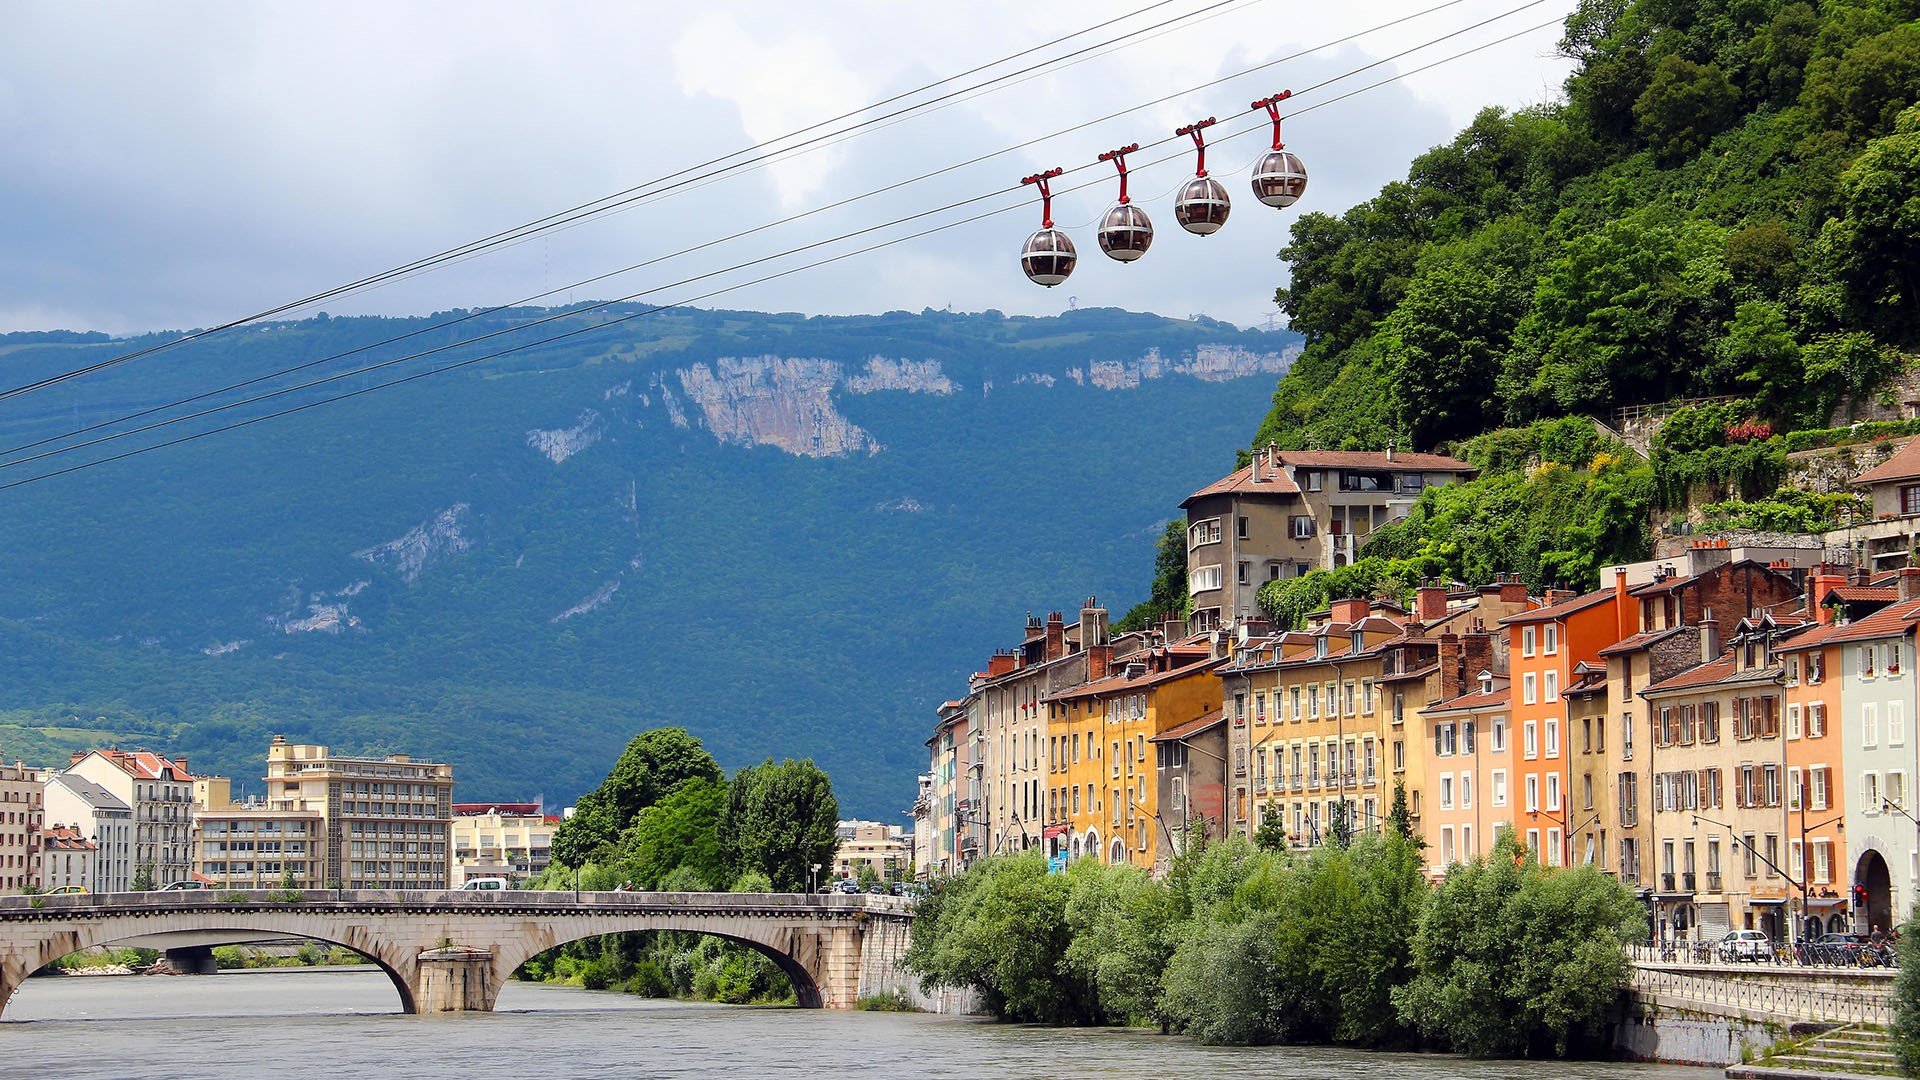 Isere river and cable car in the center of Grenoble, France. Windows 10 Spotlight Image